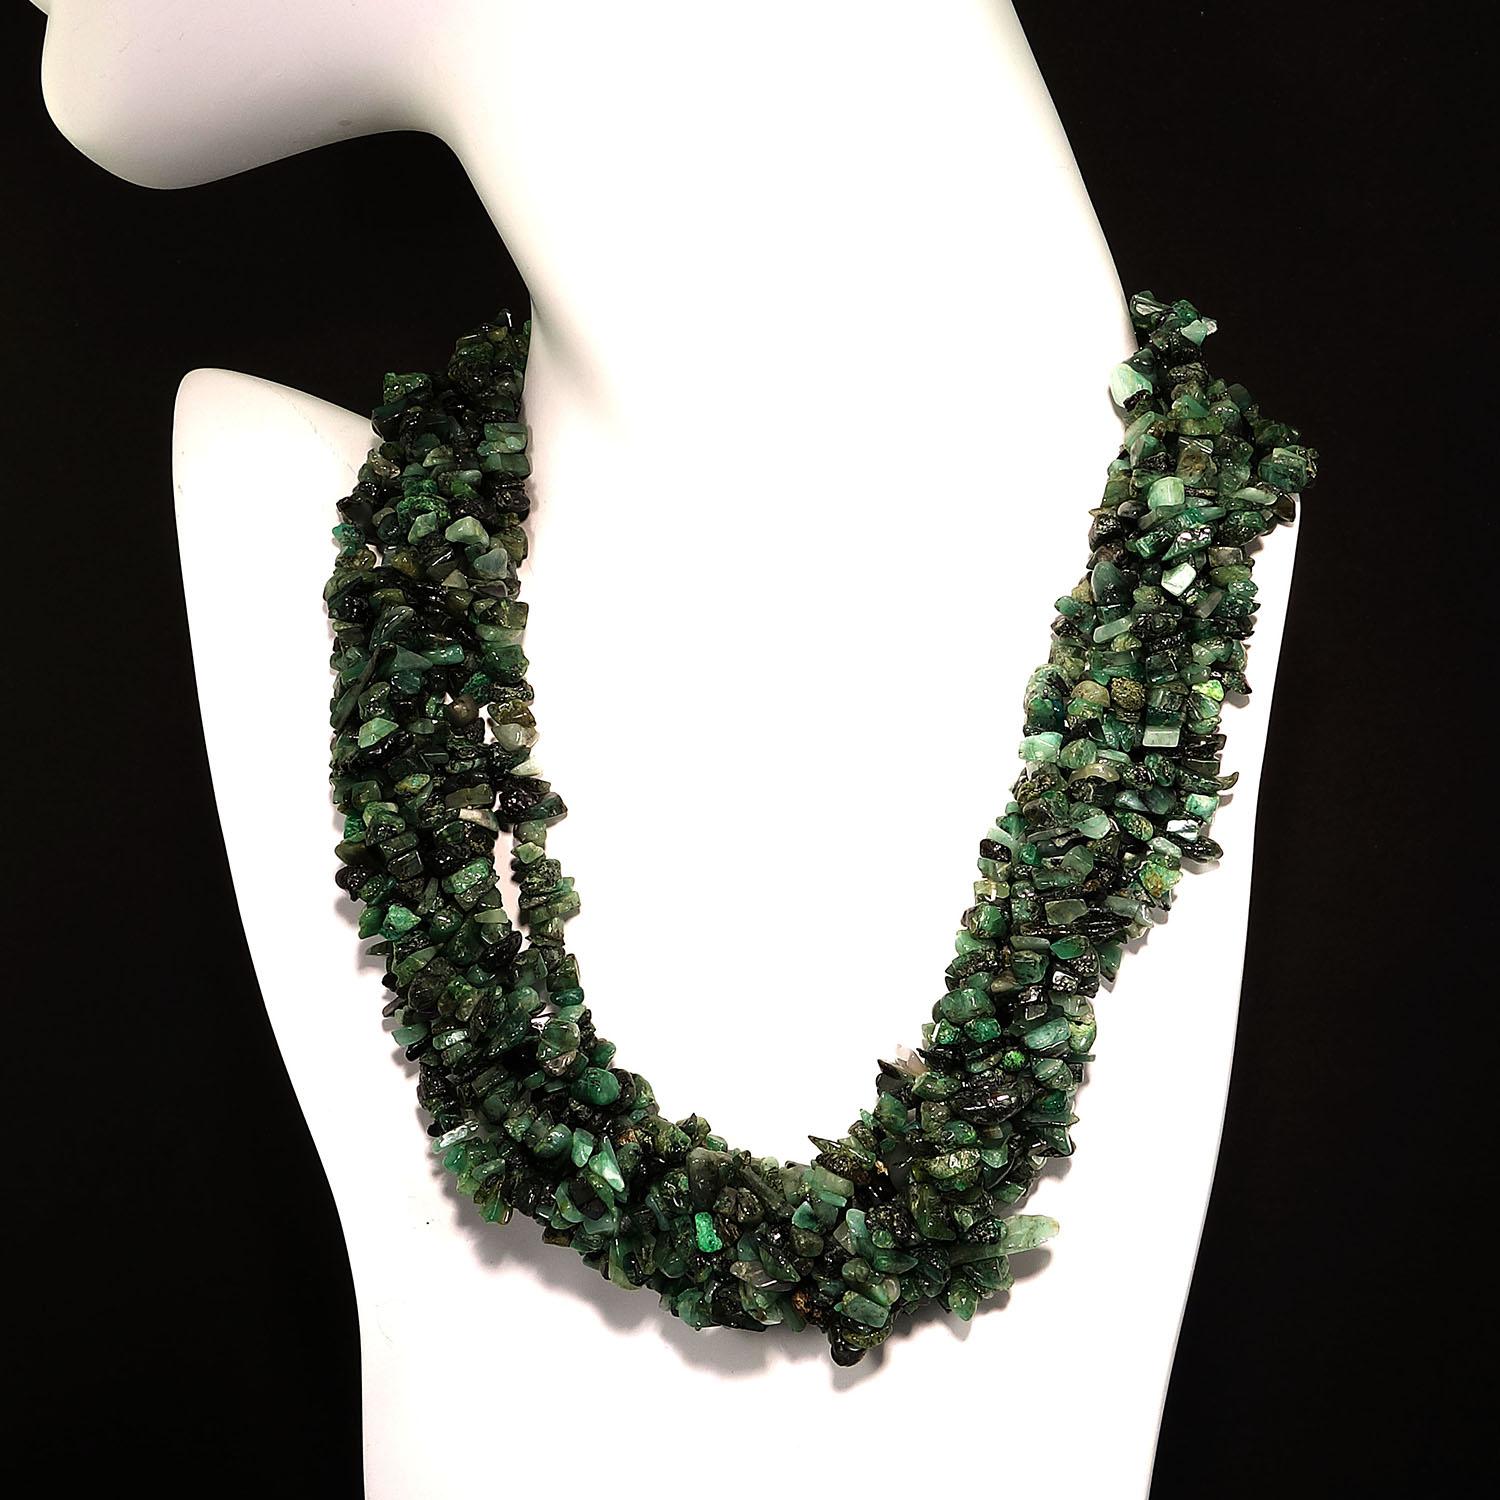 Necklace of green Emerald chips in four continuous strands 3